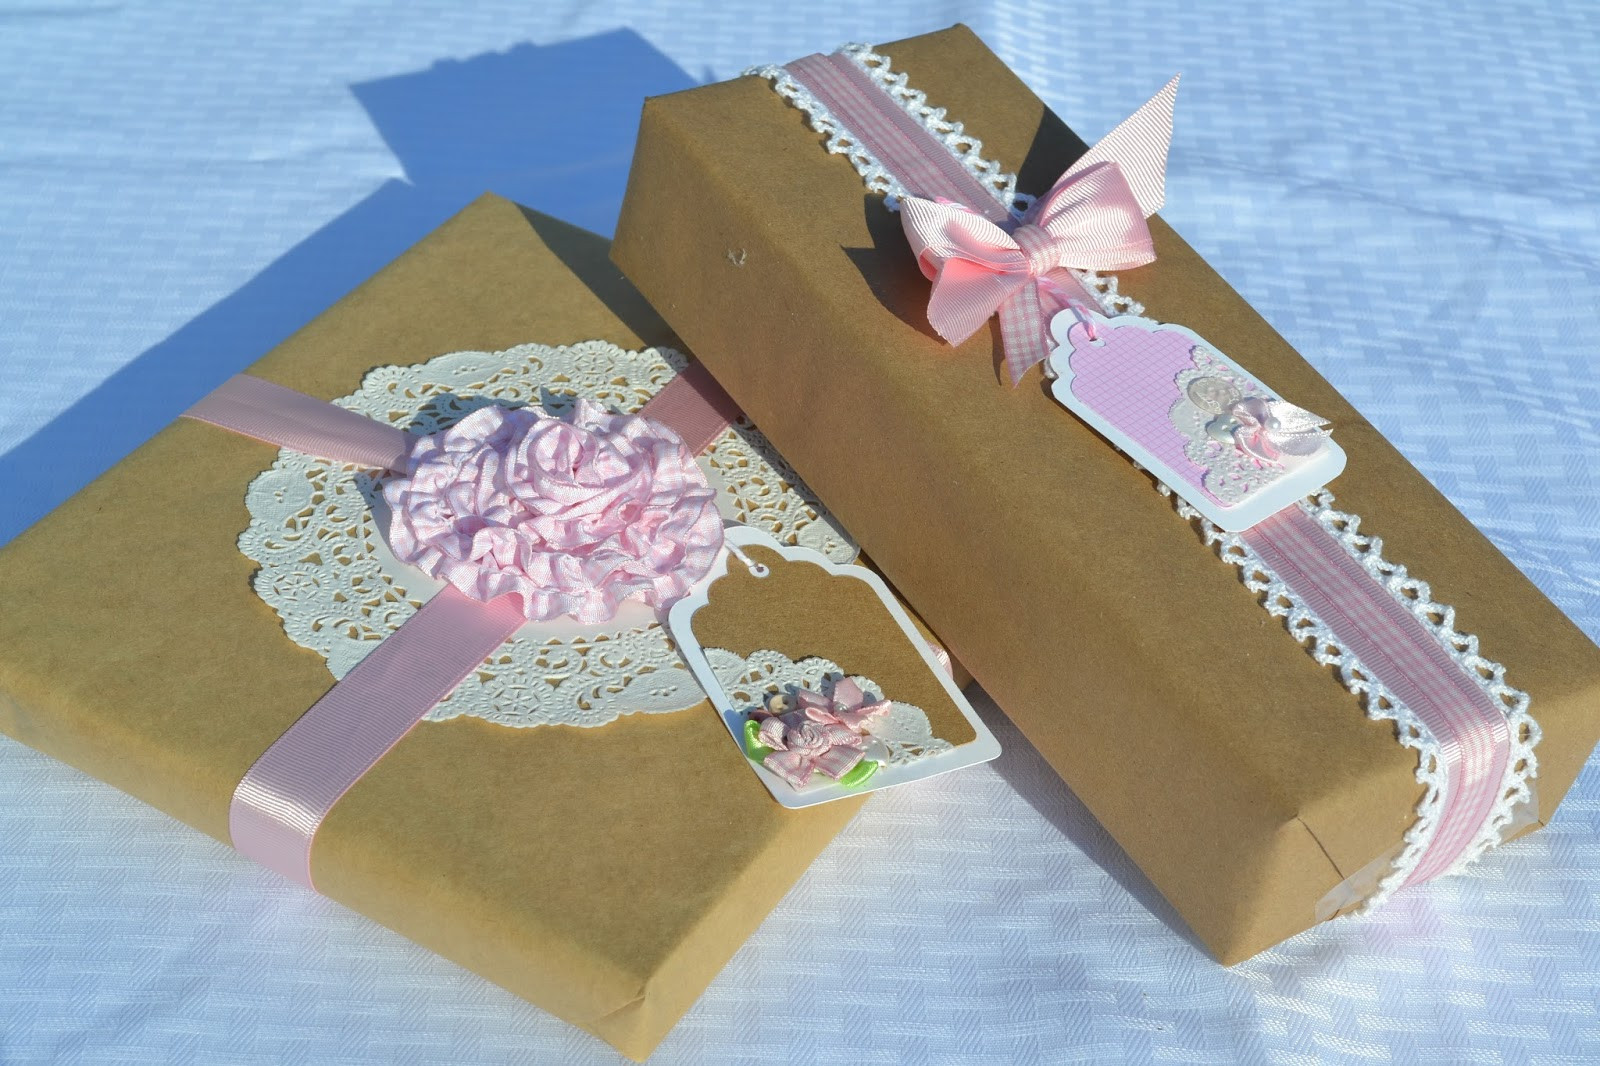 Baby Shower Gift Wrapping Ideas Pinterest
 Corner of Plaid and Paisley Gift Wrapping Posts